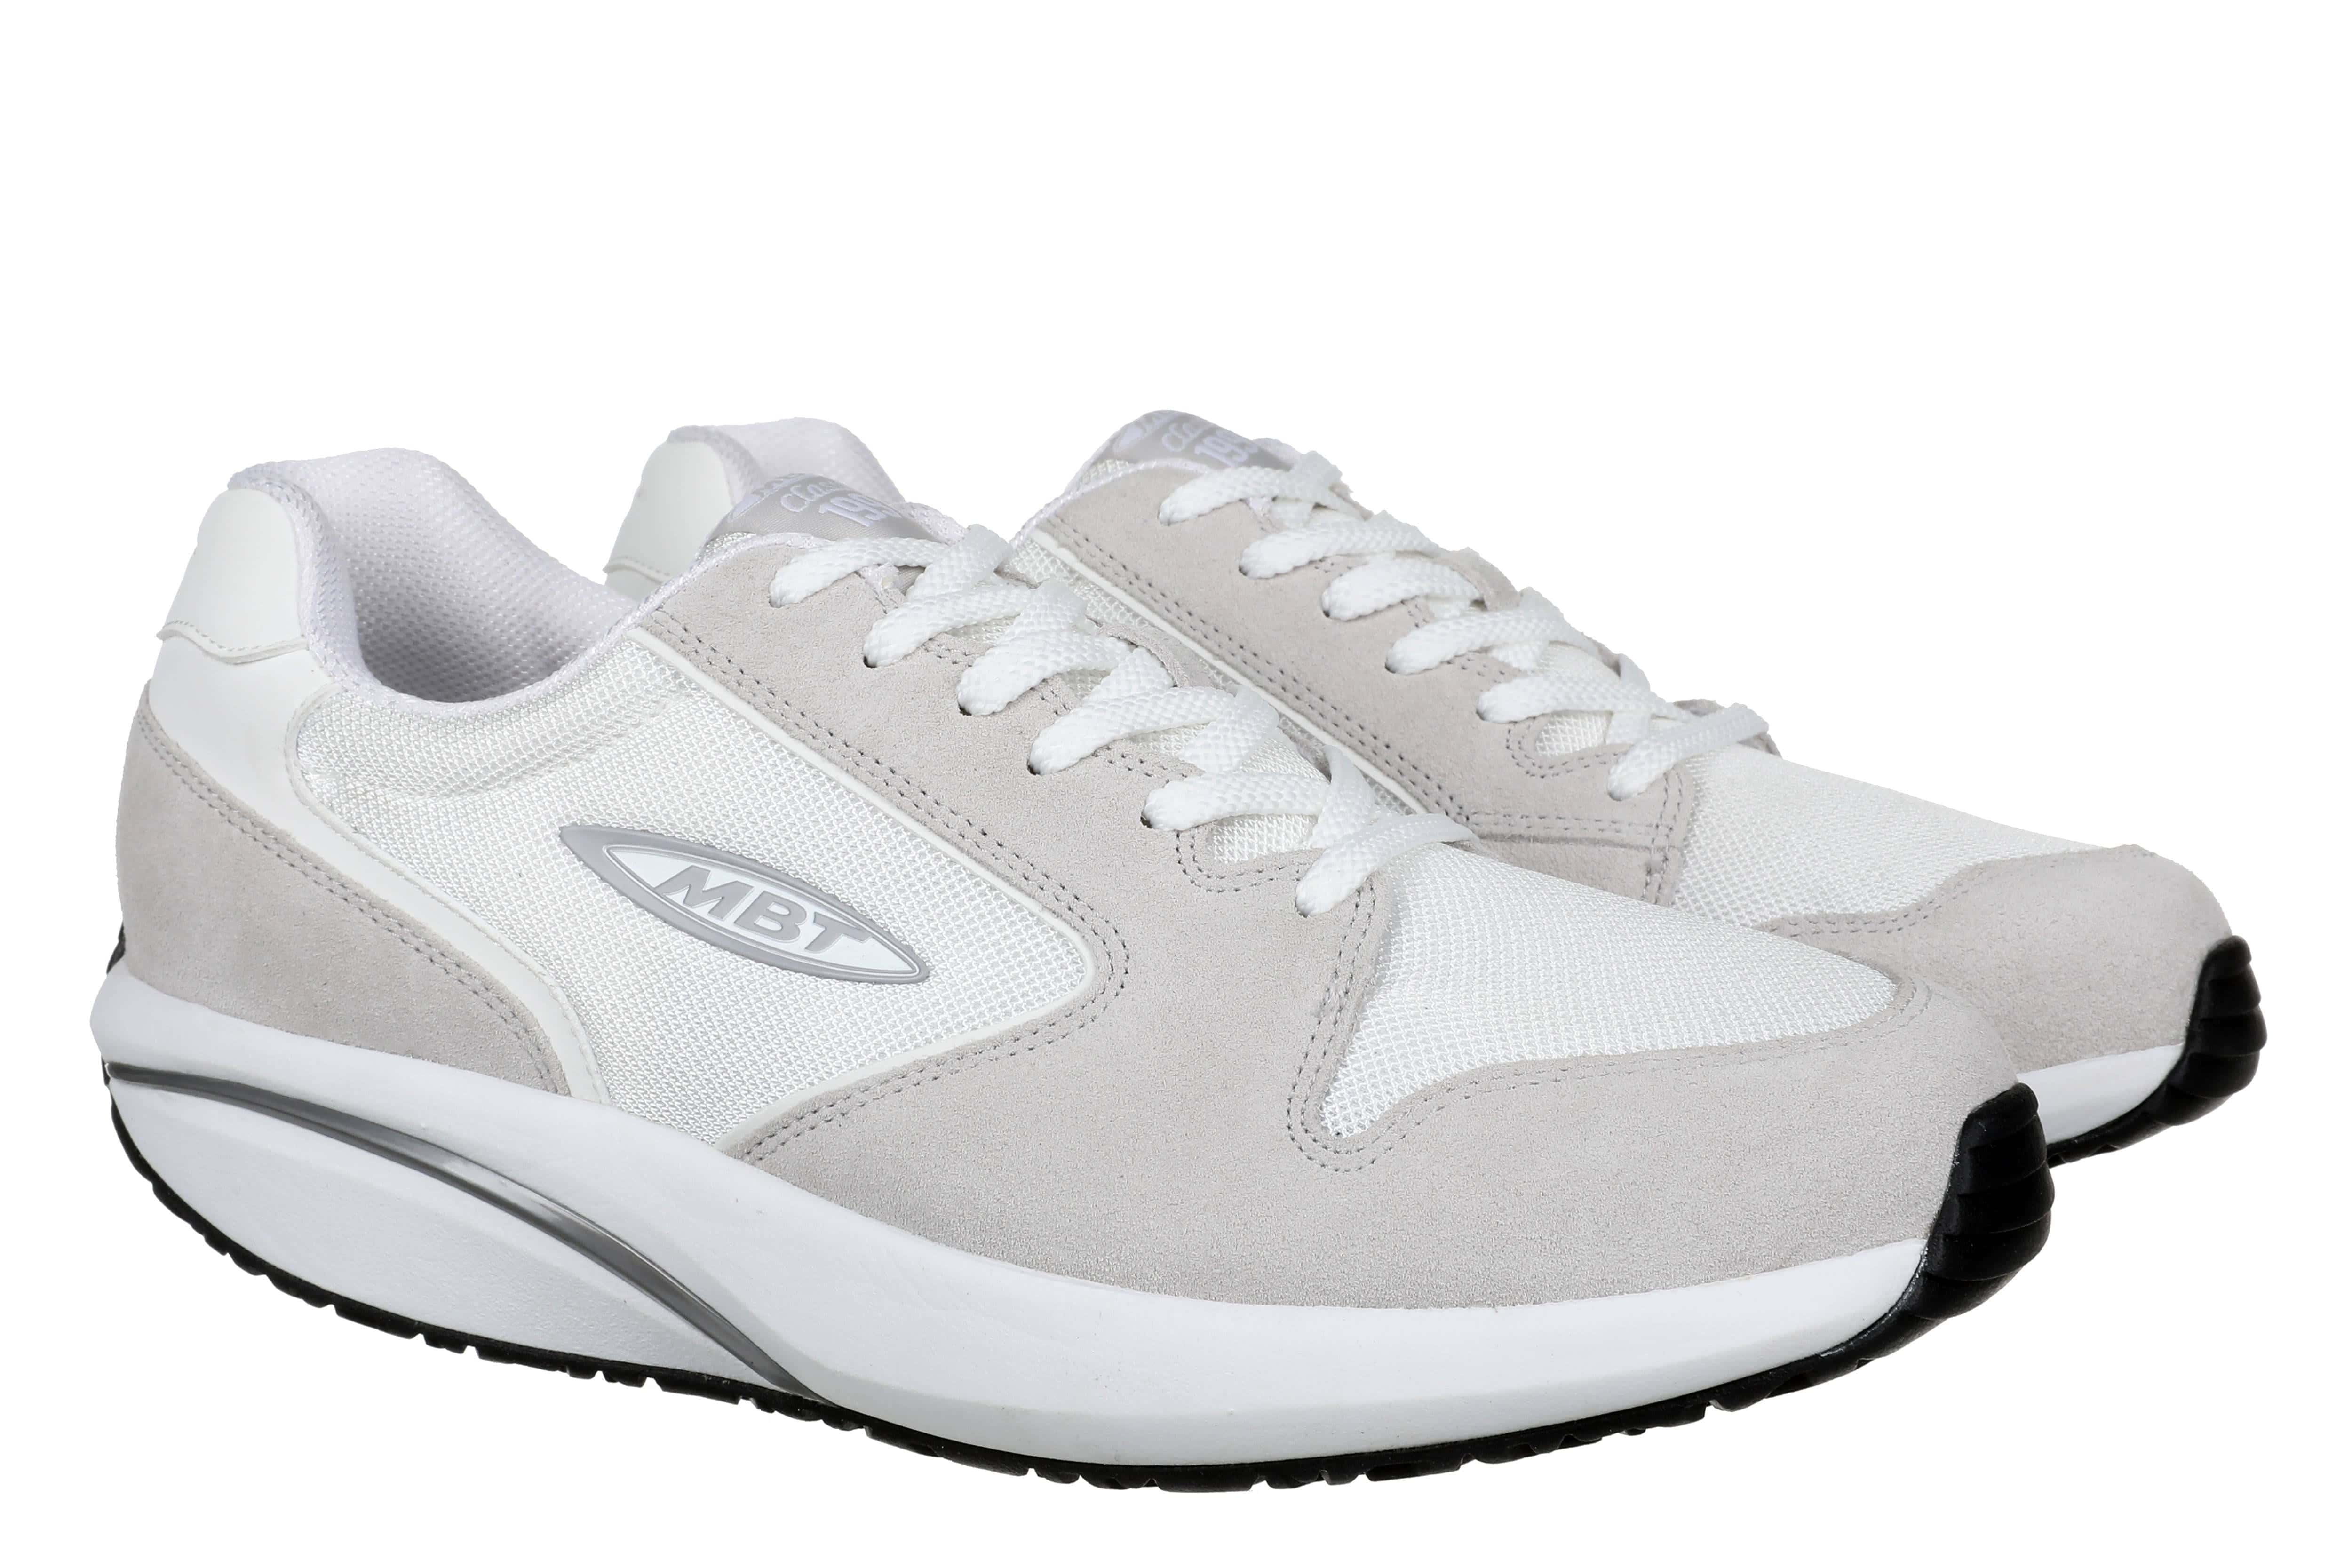 MBT SNEAKERS MAN MBT-1997 CLASSIC M WHITE